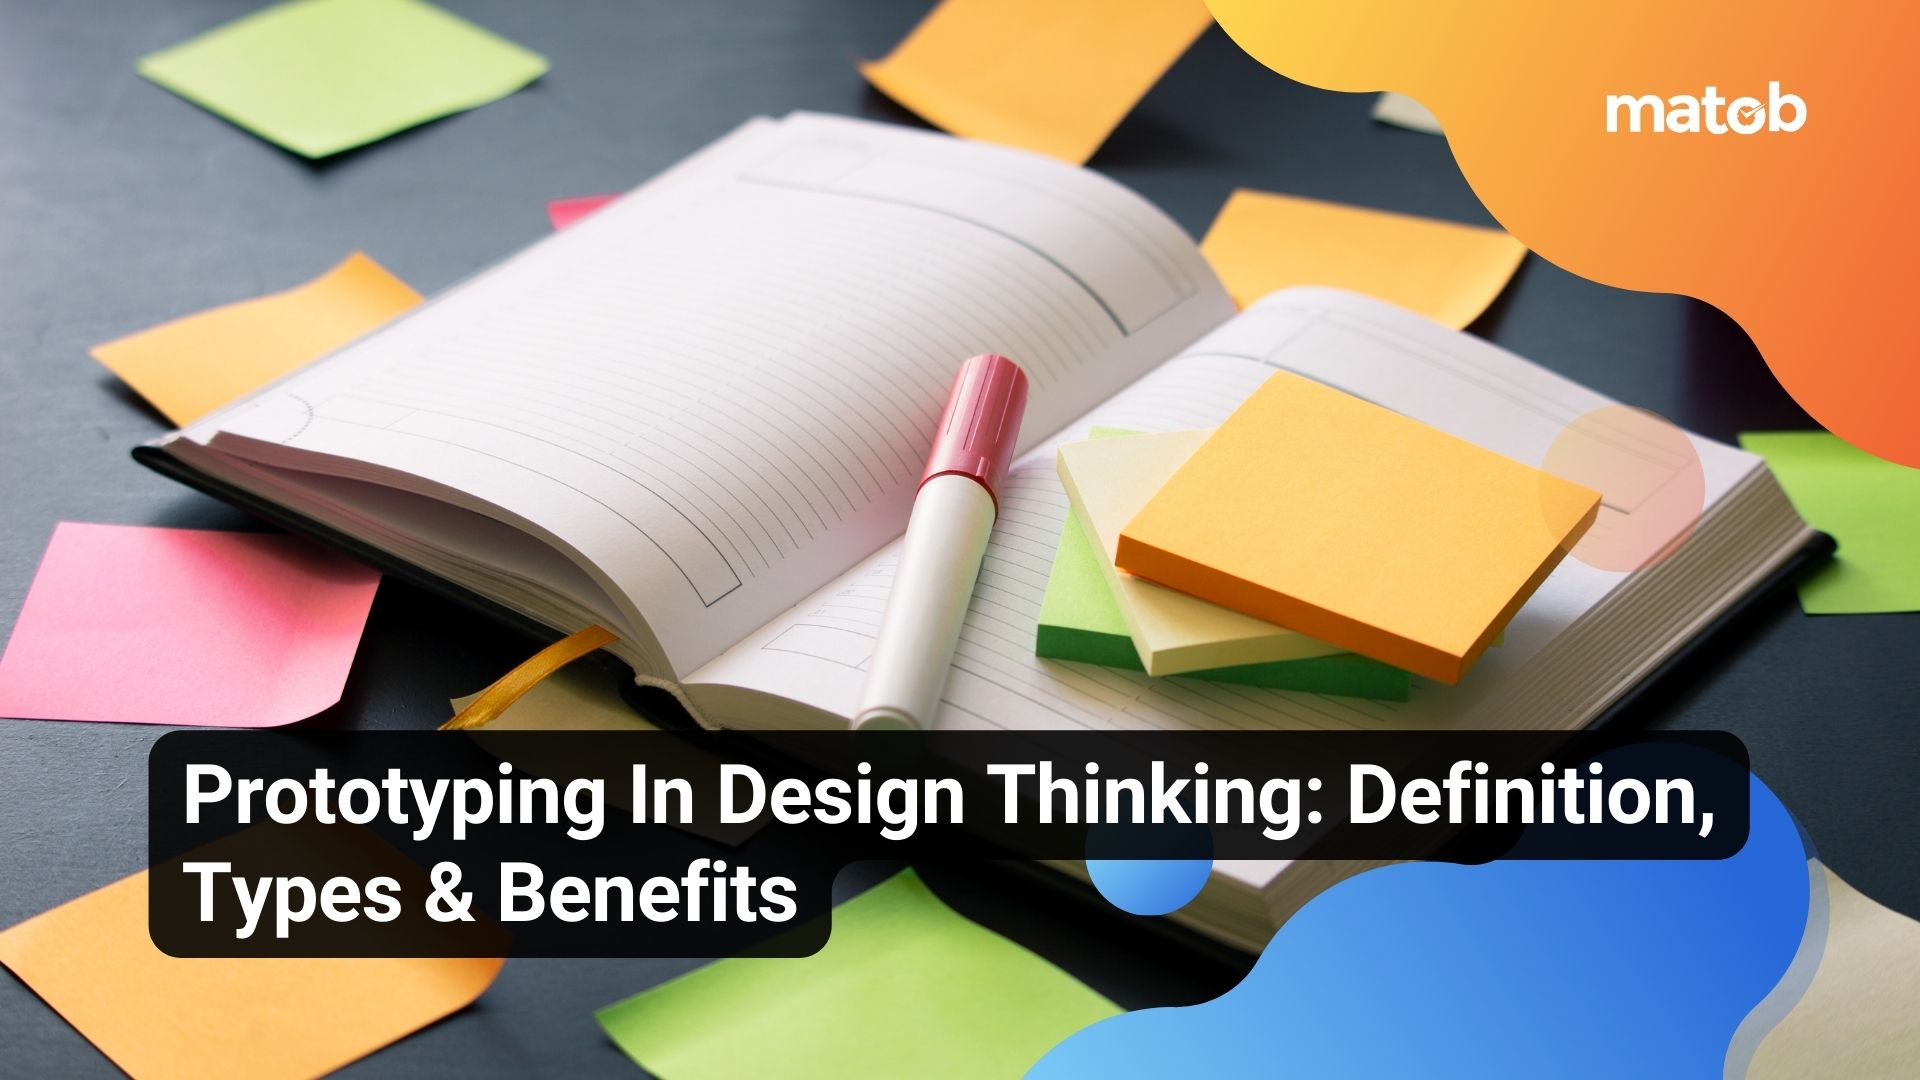 Prototyping In Design Thinking: Definition, Types & Benefits